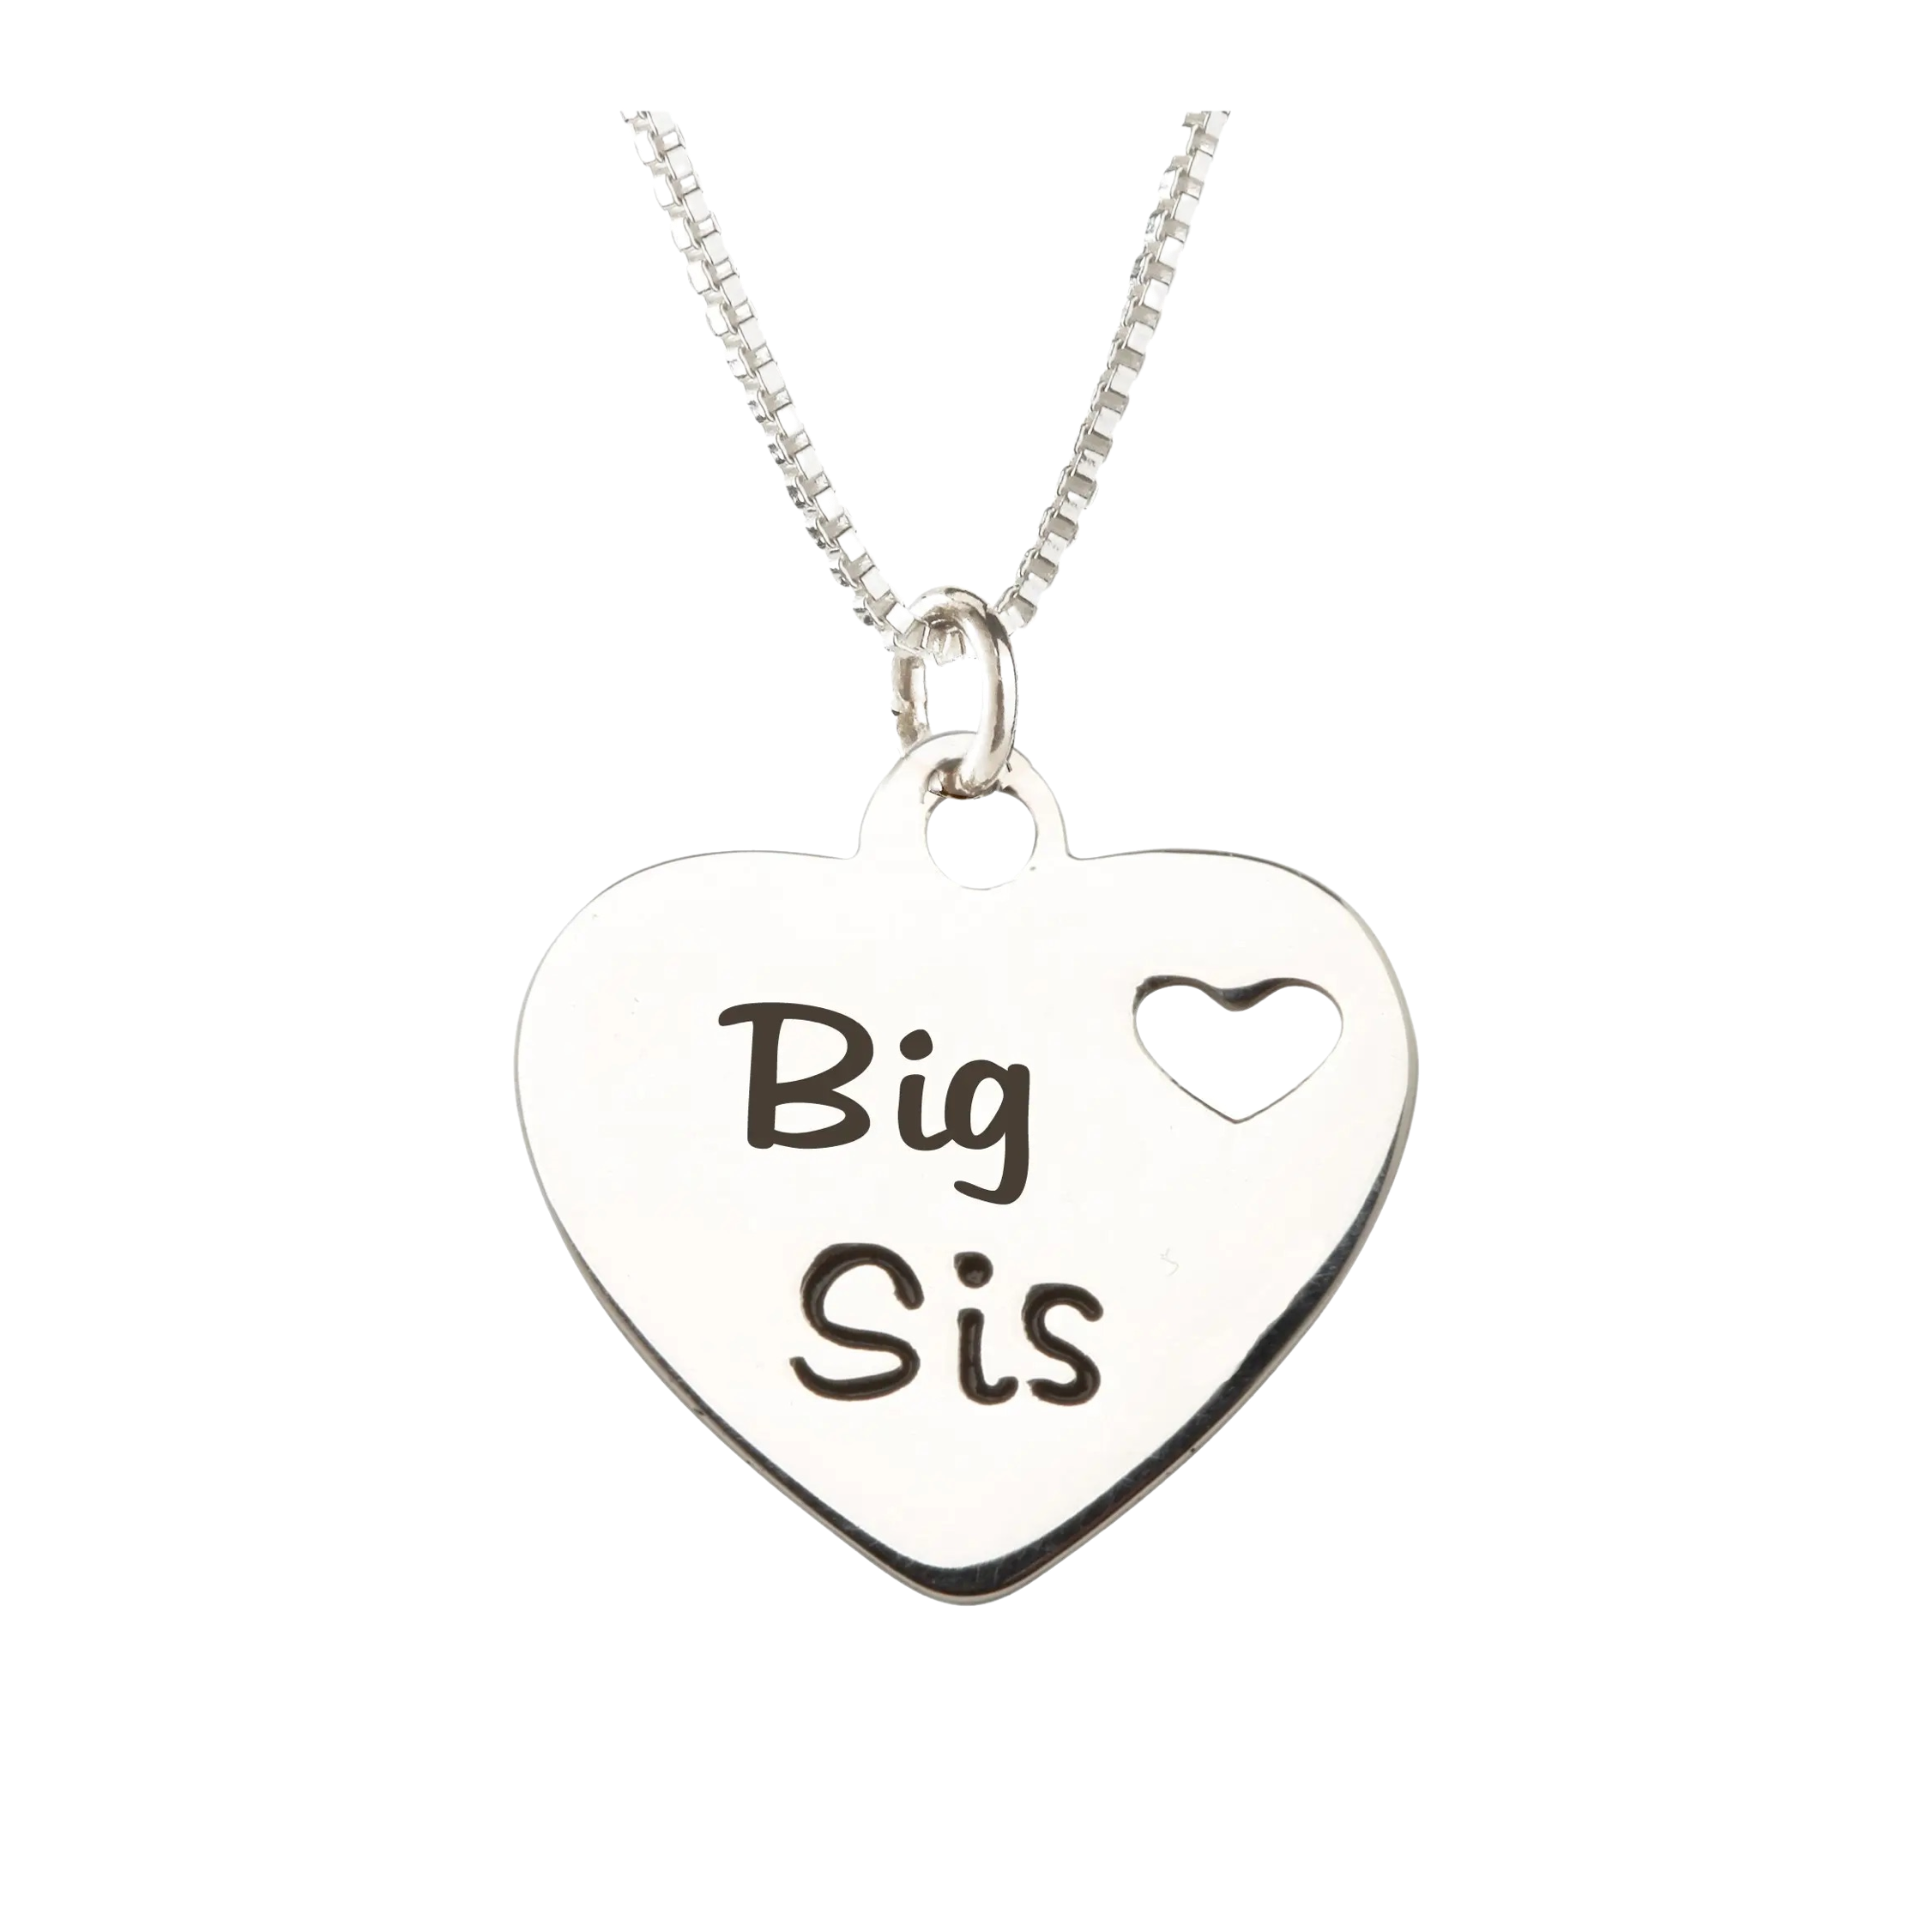 Necklaces, Pendants, Matching Sisters Necklace Jewelry Friends - Big Sis  Blue- Little Sis Pink - CI… | Matching sister necklaces, Sister necklace,  Jewelry gift sets